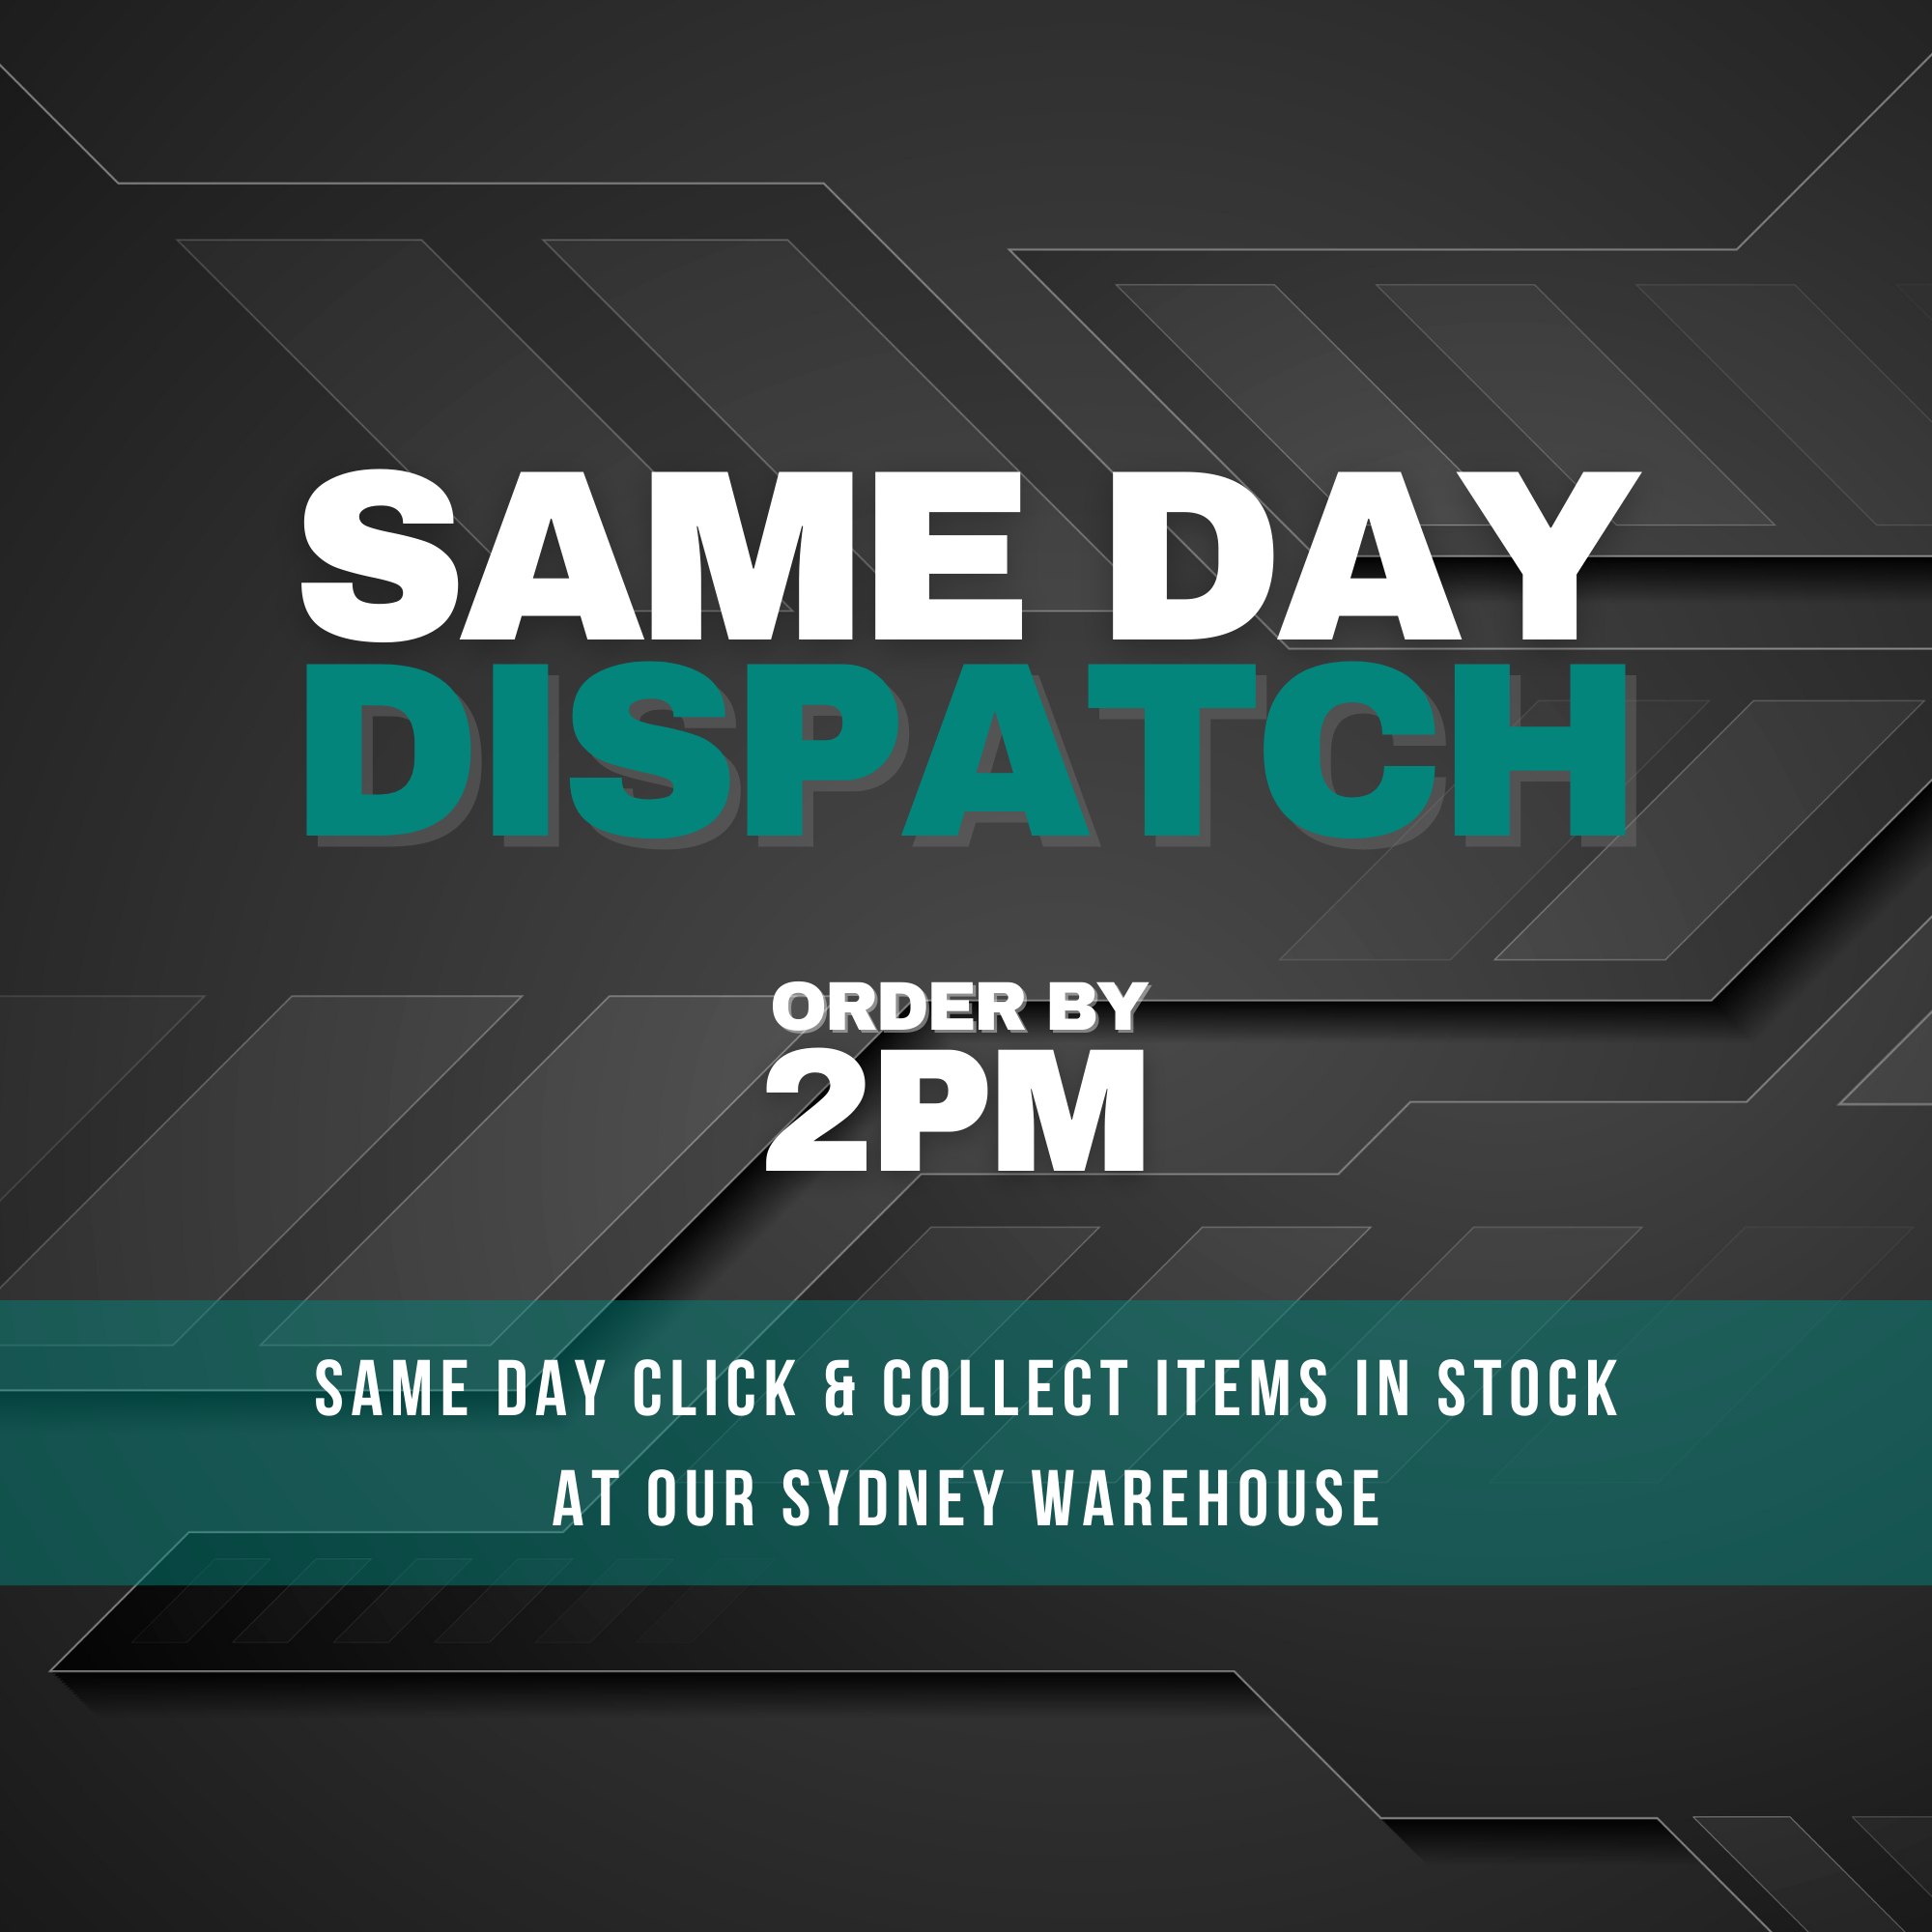 Same day dispatch on orders placed before 2pm